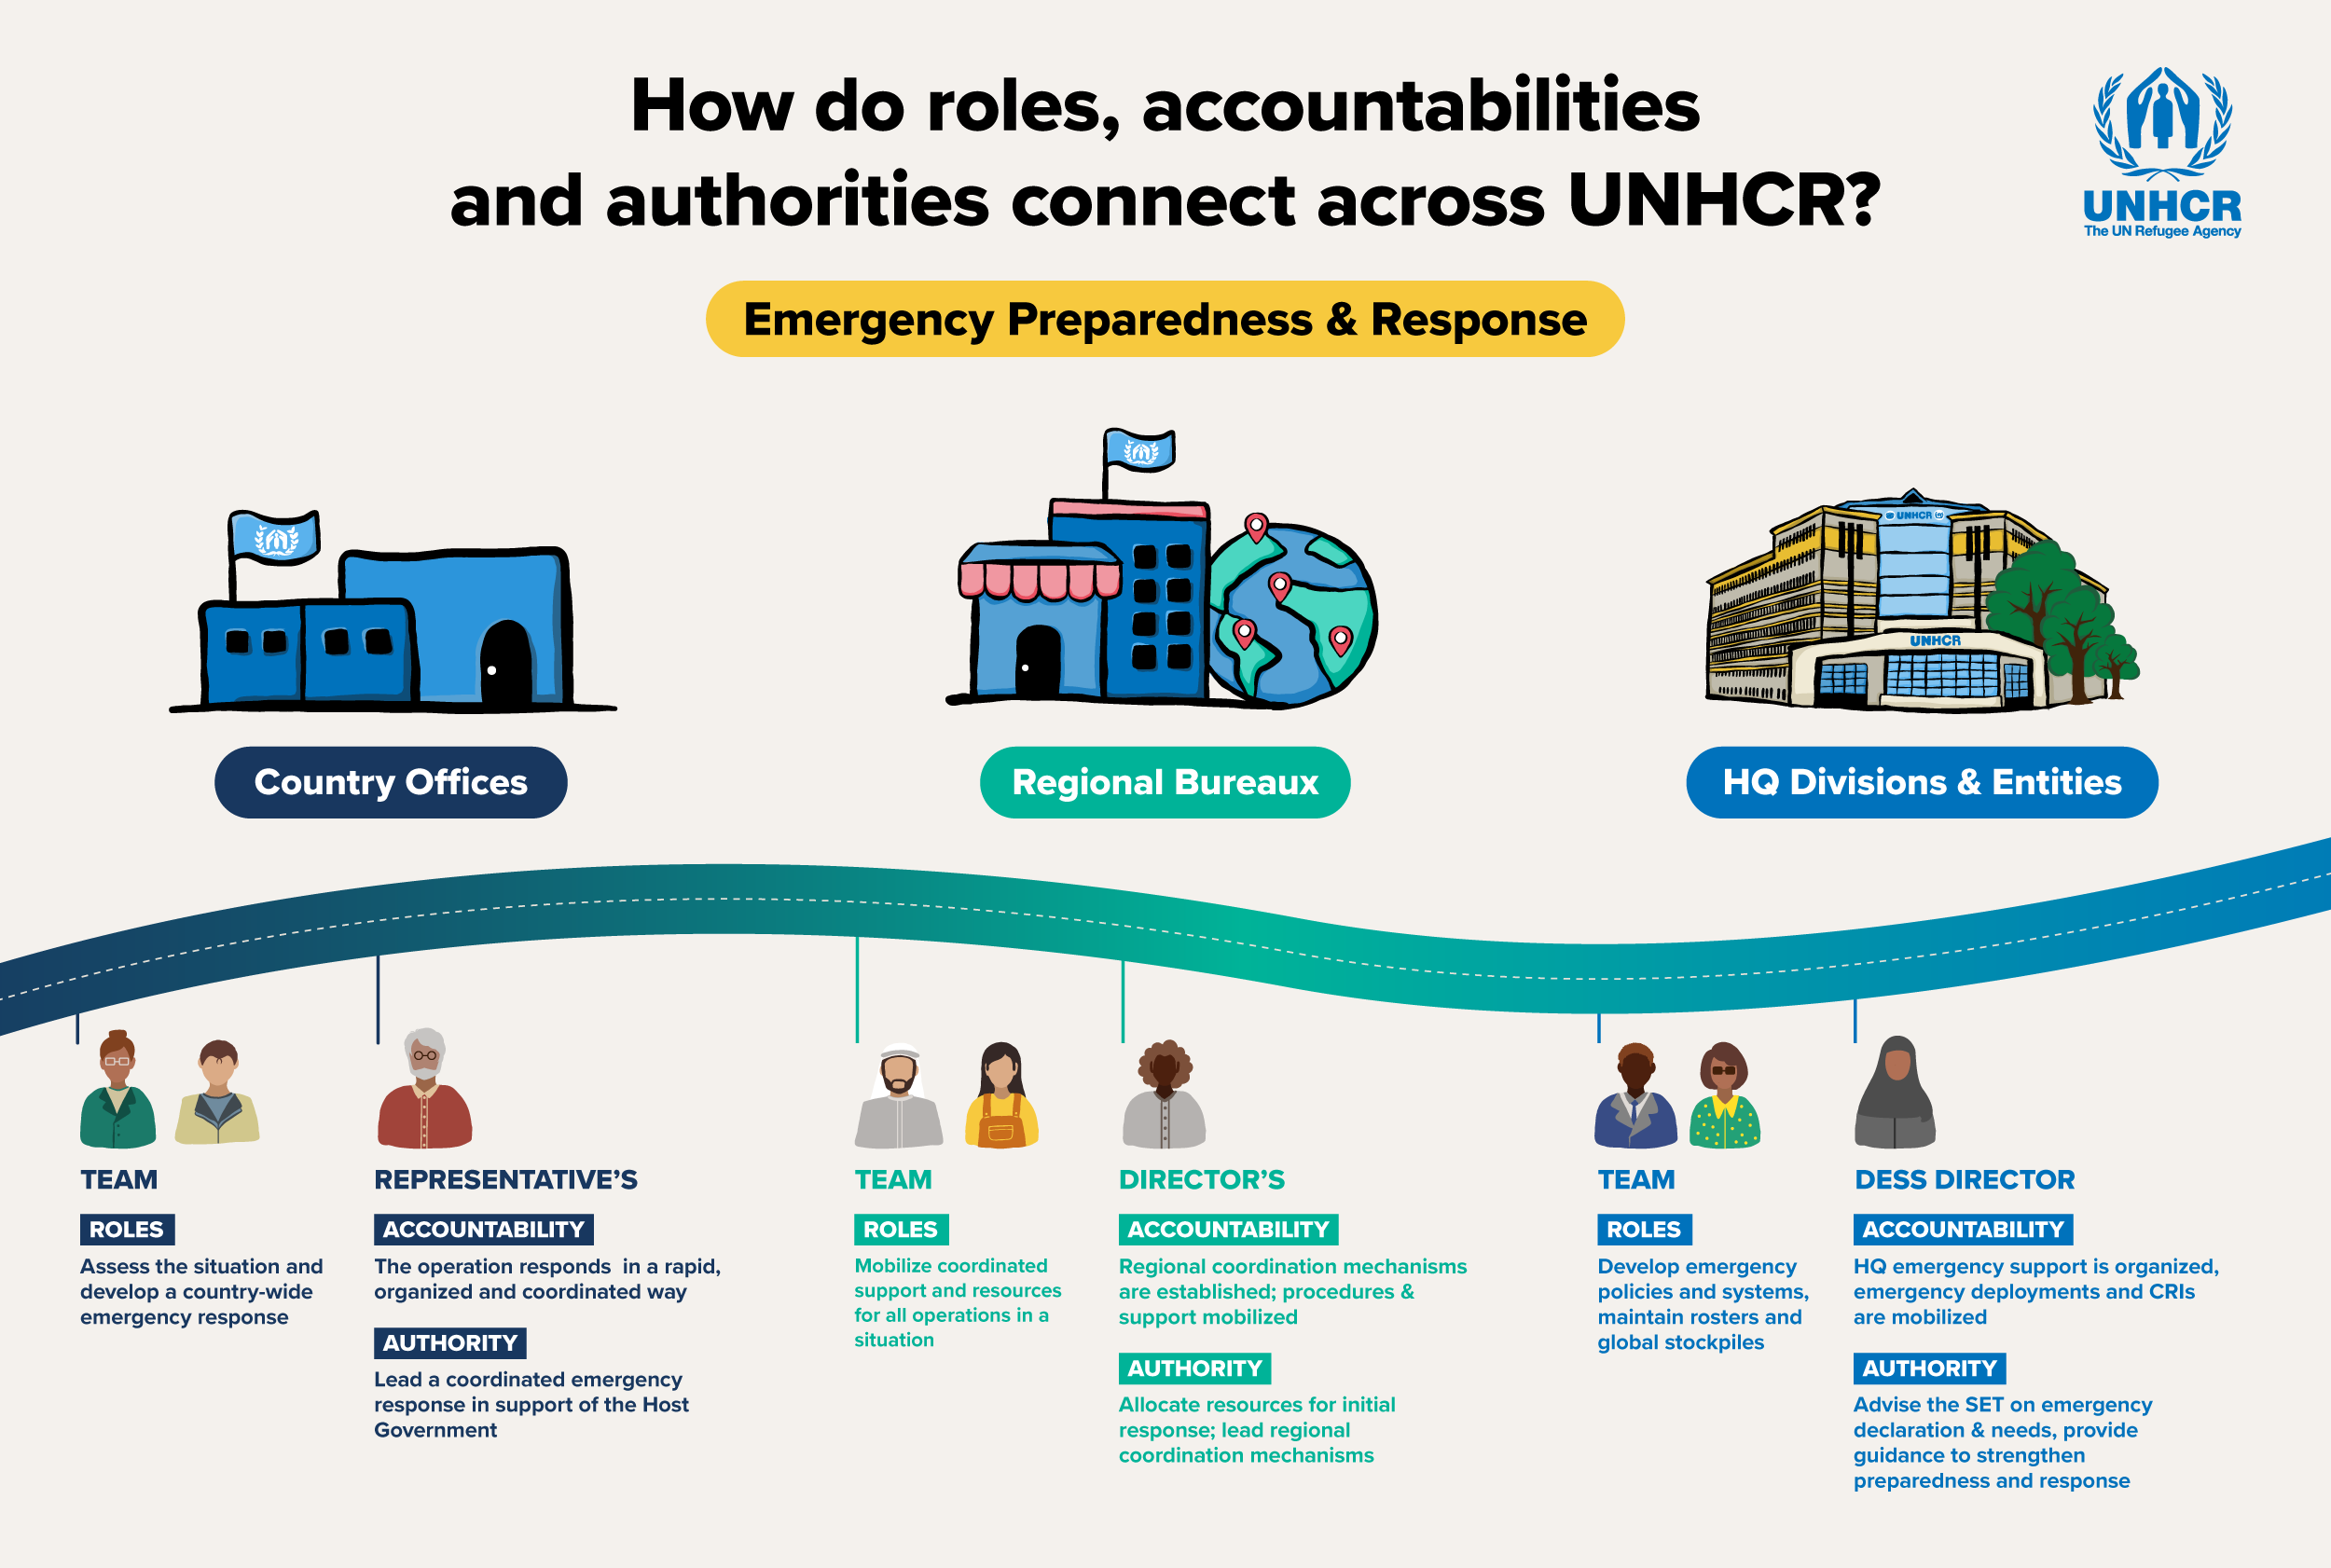 Sample of roles, accountabilities and authorities across UNHCR for emergency preparedness and response